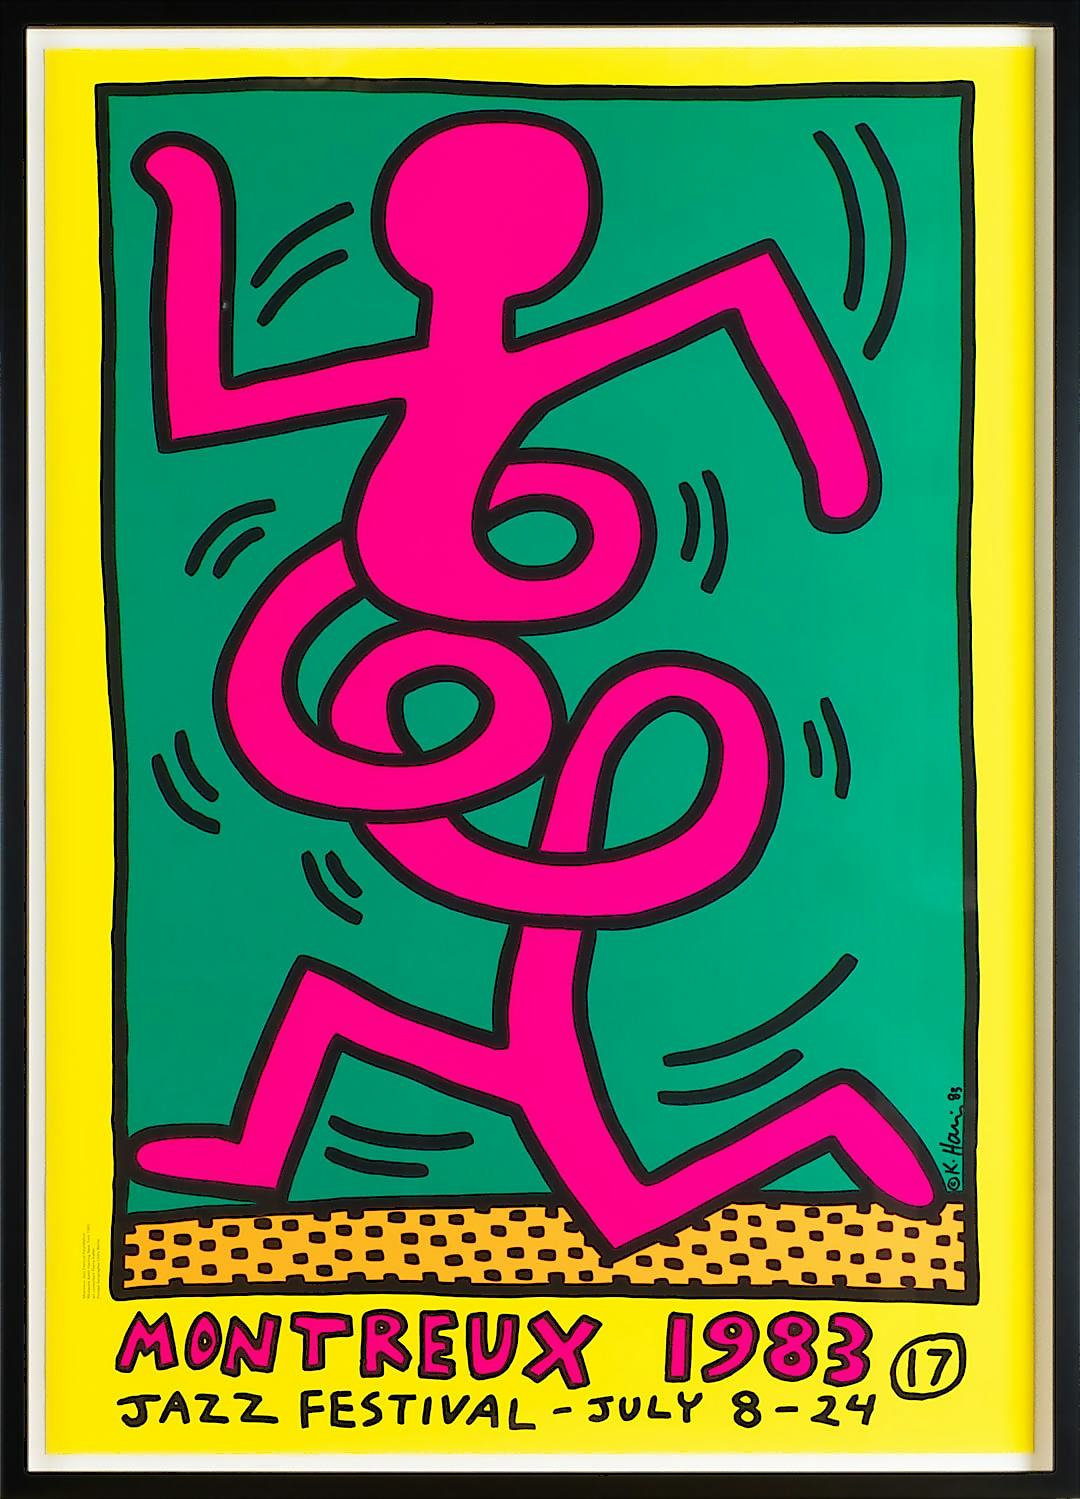 Montreux 1983, (17) Jazz Festival - July 8-24 by Keith Haring